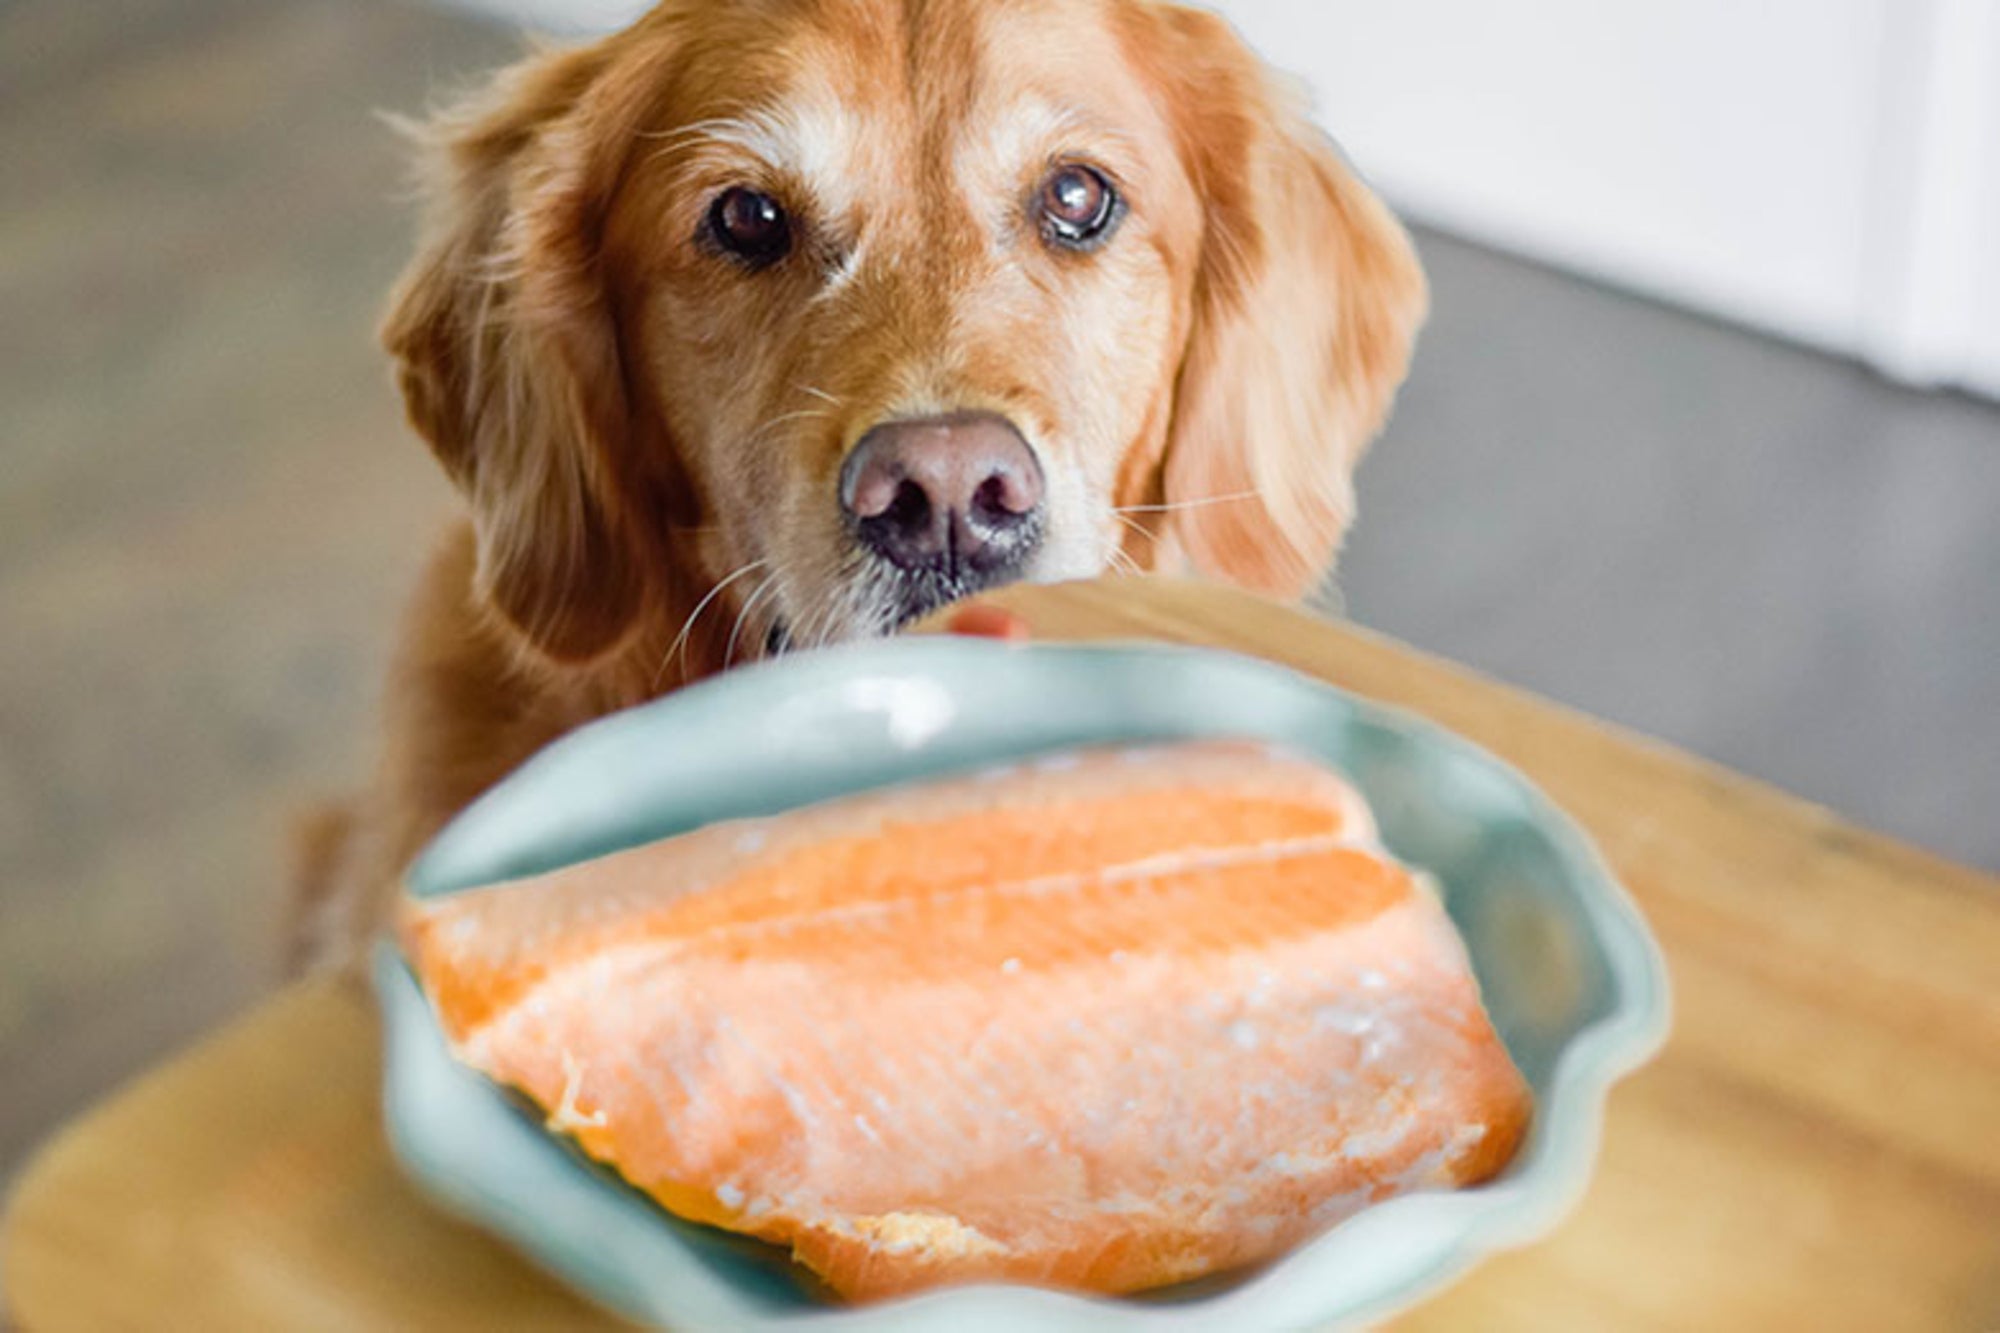 Can Dogs Eat Salmon?